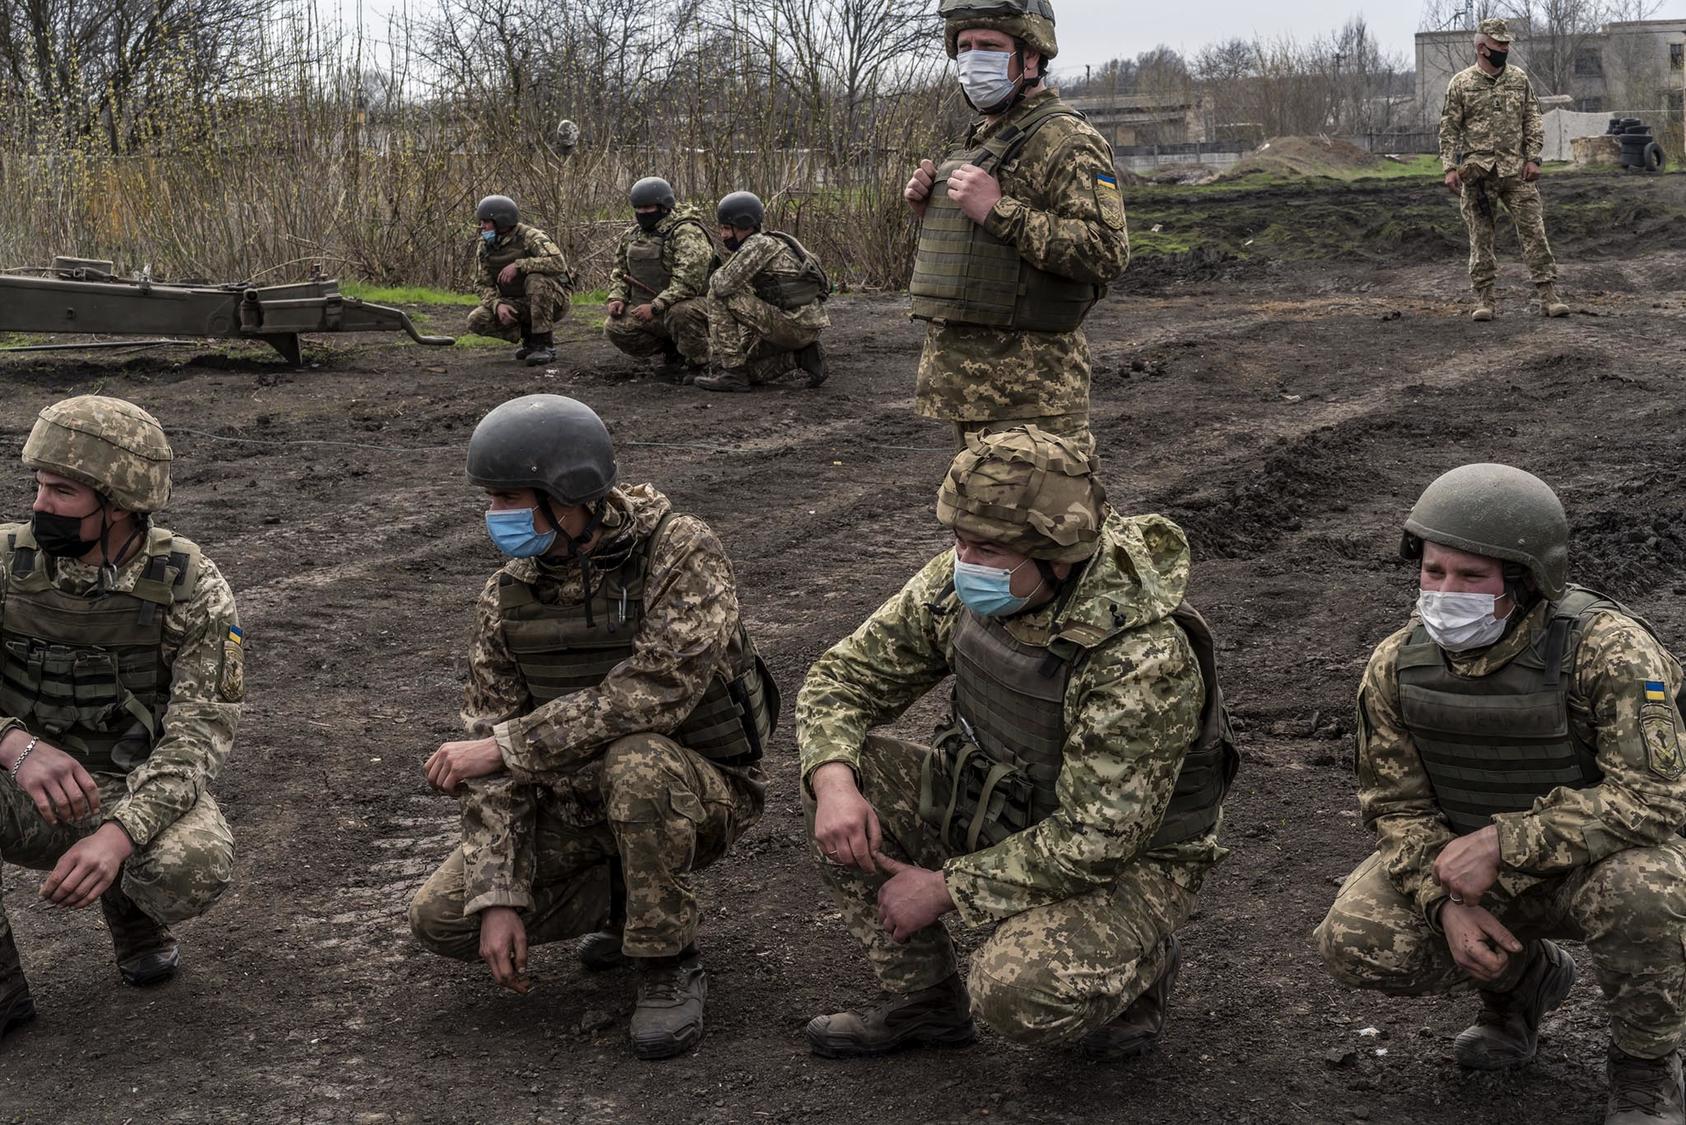 Ukrainian troops gather near the Russian-controlled part of Ukraine’s Donbas region April 19, as Russia massed its troops on the nearby border. Russia’s “hybrid war” on Ukraine joins military and non-military elements. (Brendan Hoffman/The New York Times)